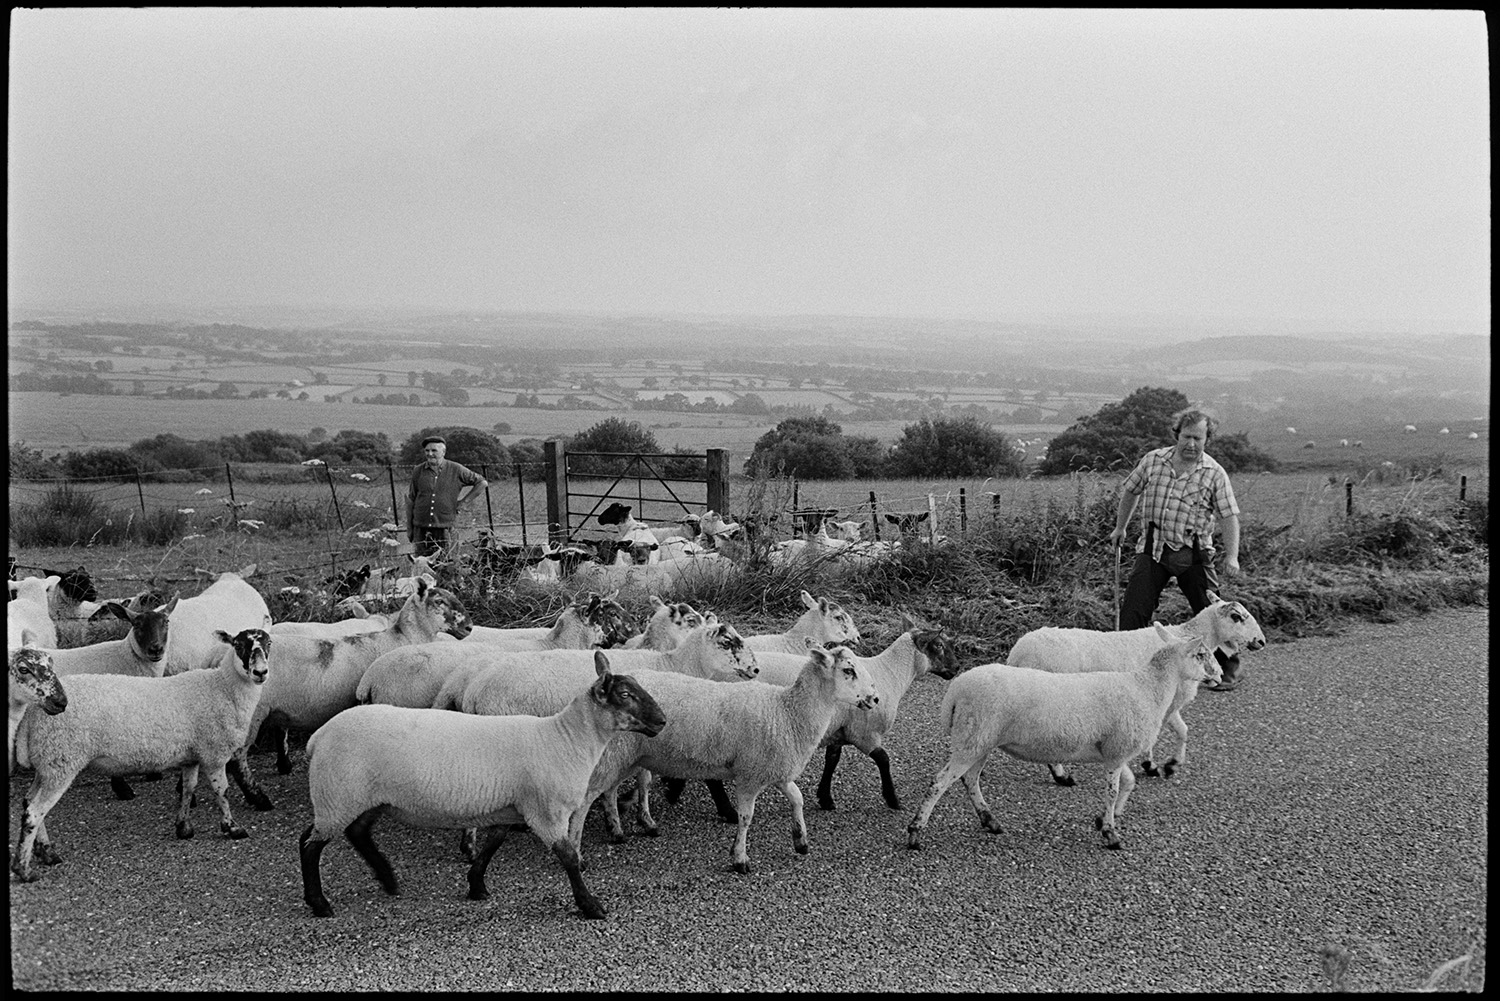 Farmers checking sheep on moor. 
[Two men checking and herding sheep along a road on Hatherleigh Moor. A landscape of fields and trees can be seen in the background.]